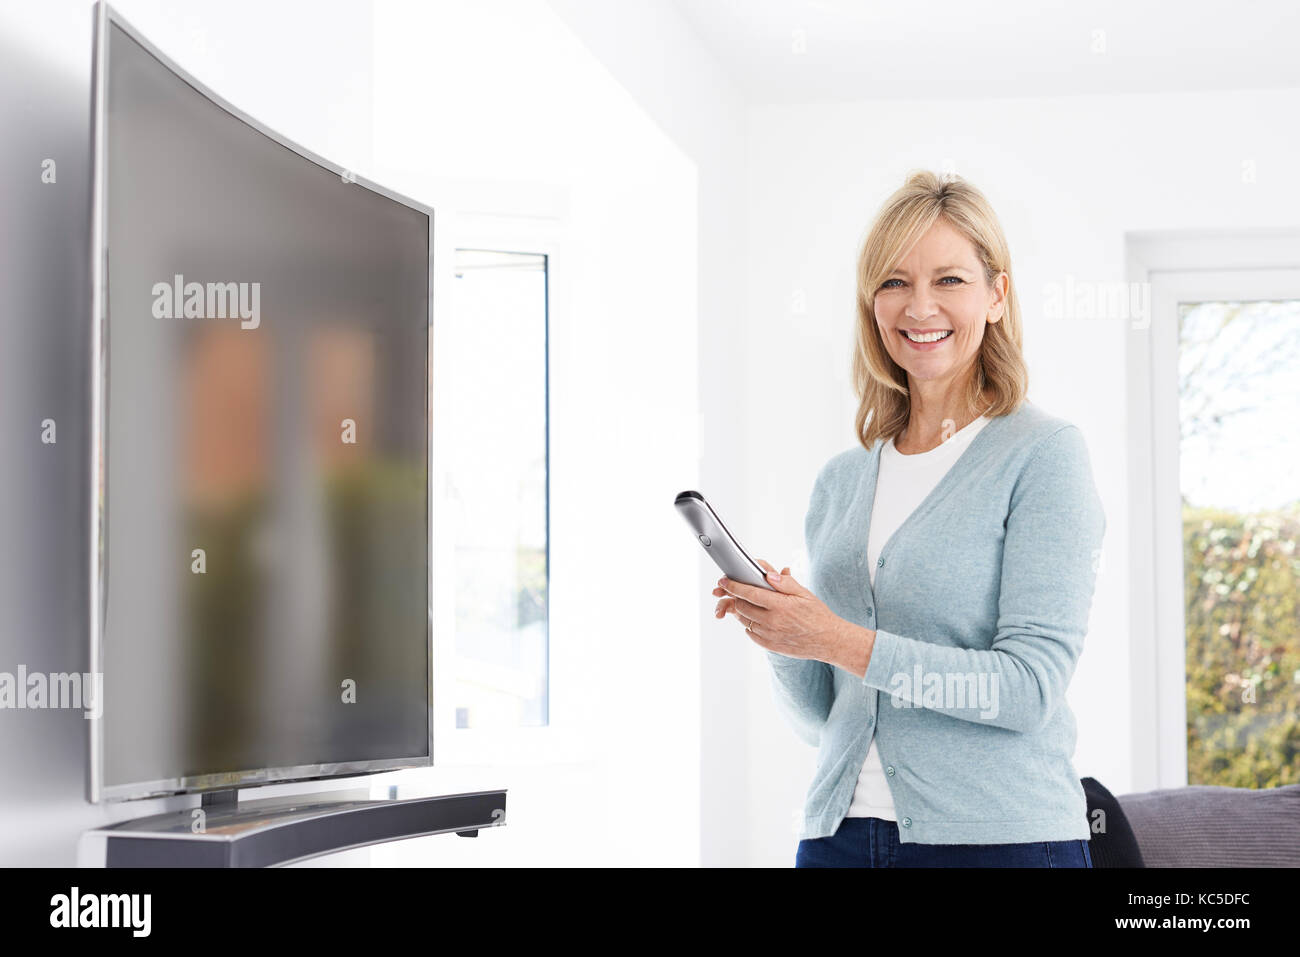 Mature Woman With New Curved Screen Television At Home Stock Photo